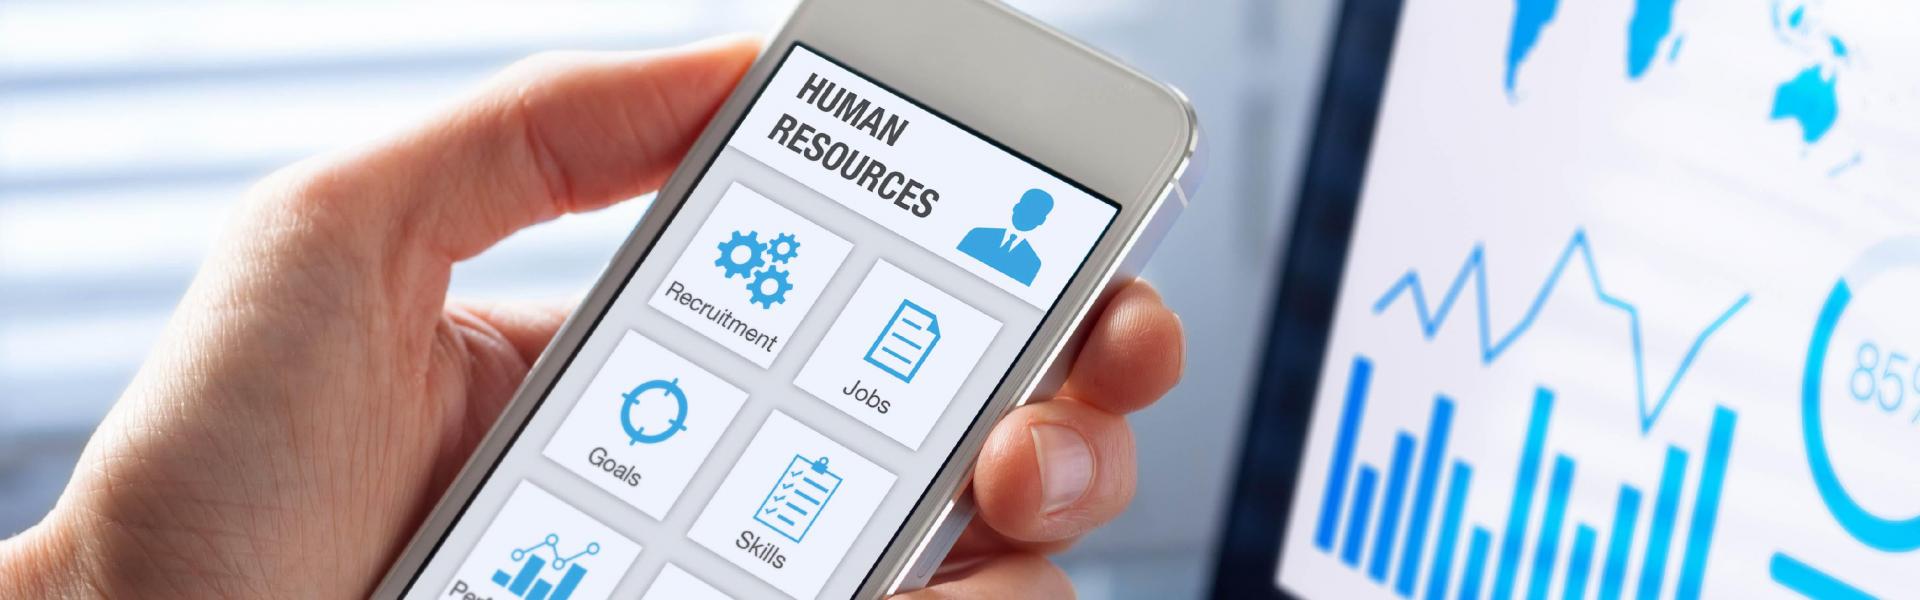 Exela HR Solutions blog on building paperless HR departments human resources business partner services.